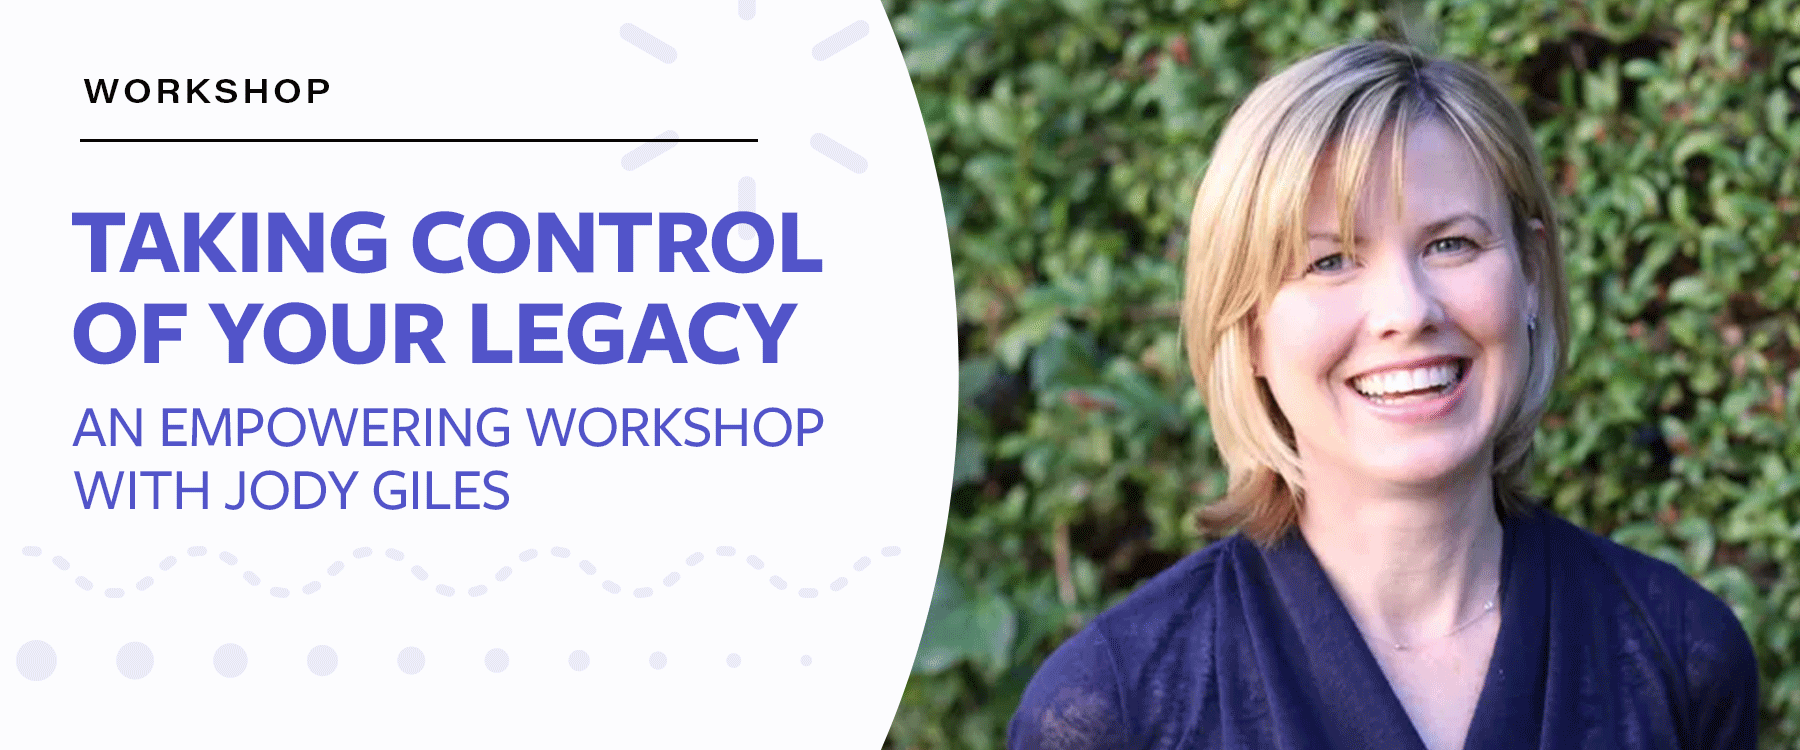 Taking Control of Your Legacy: An Empowering Workshop with Jody Giles